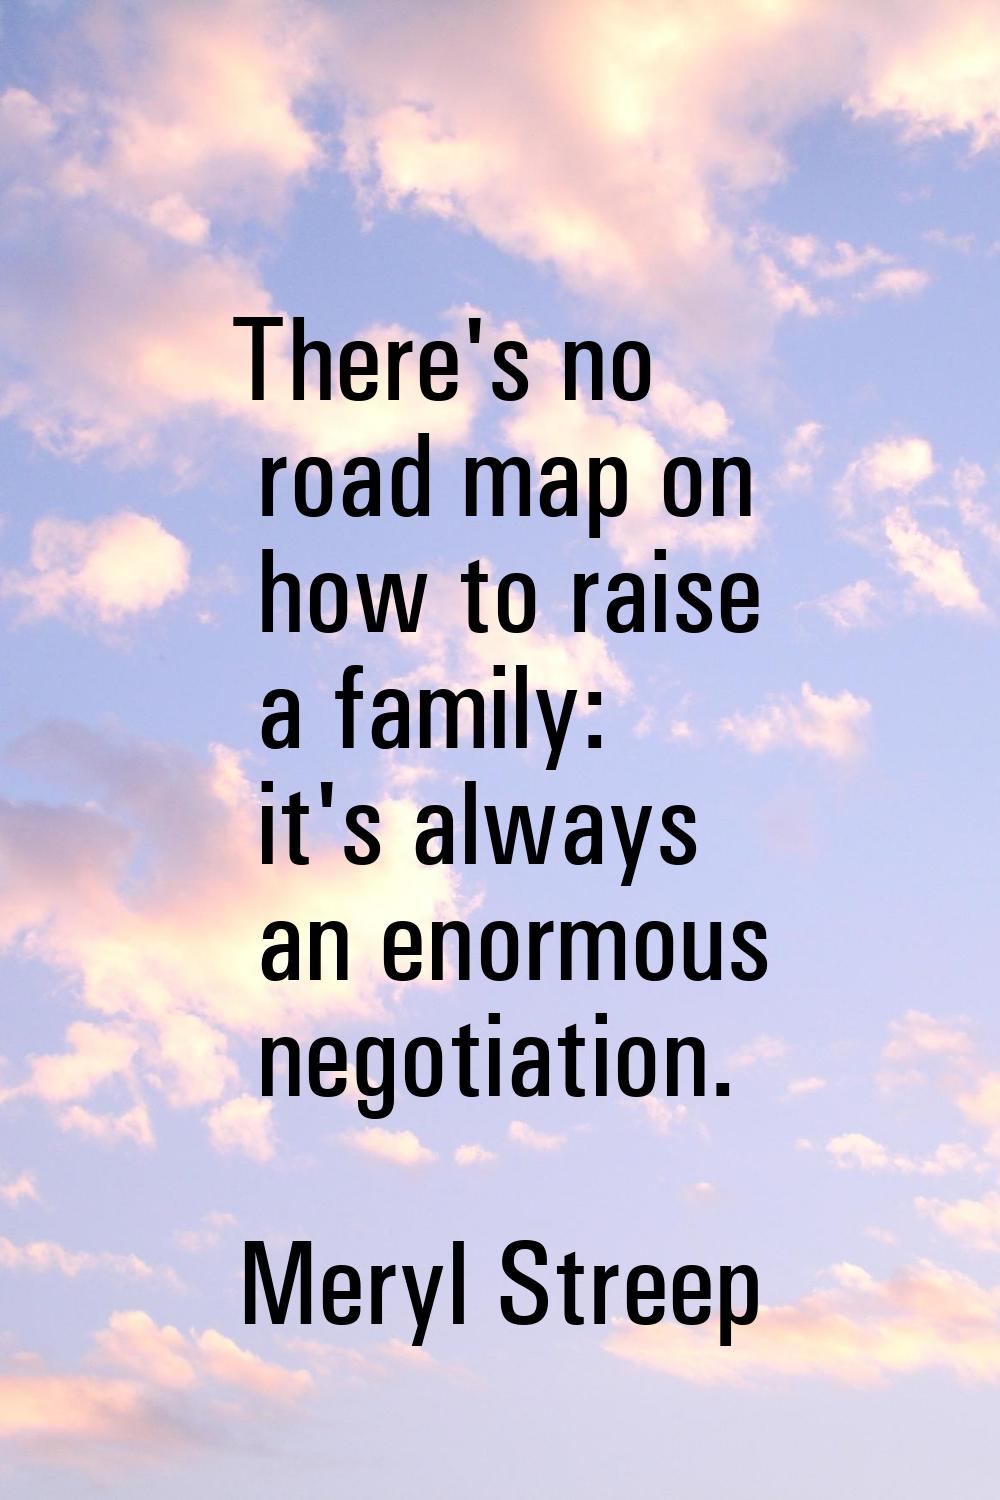 There's no road map on how to raise a family: it's always an enormous negotiation.